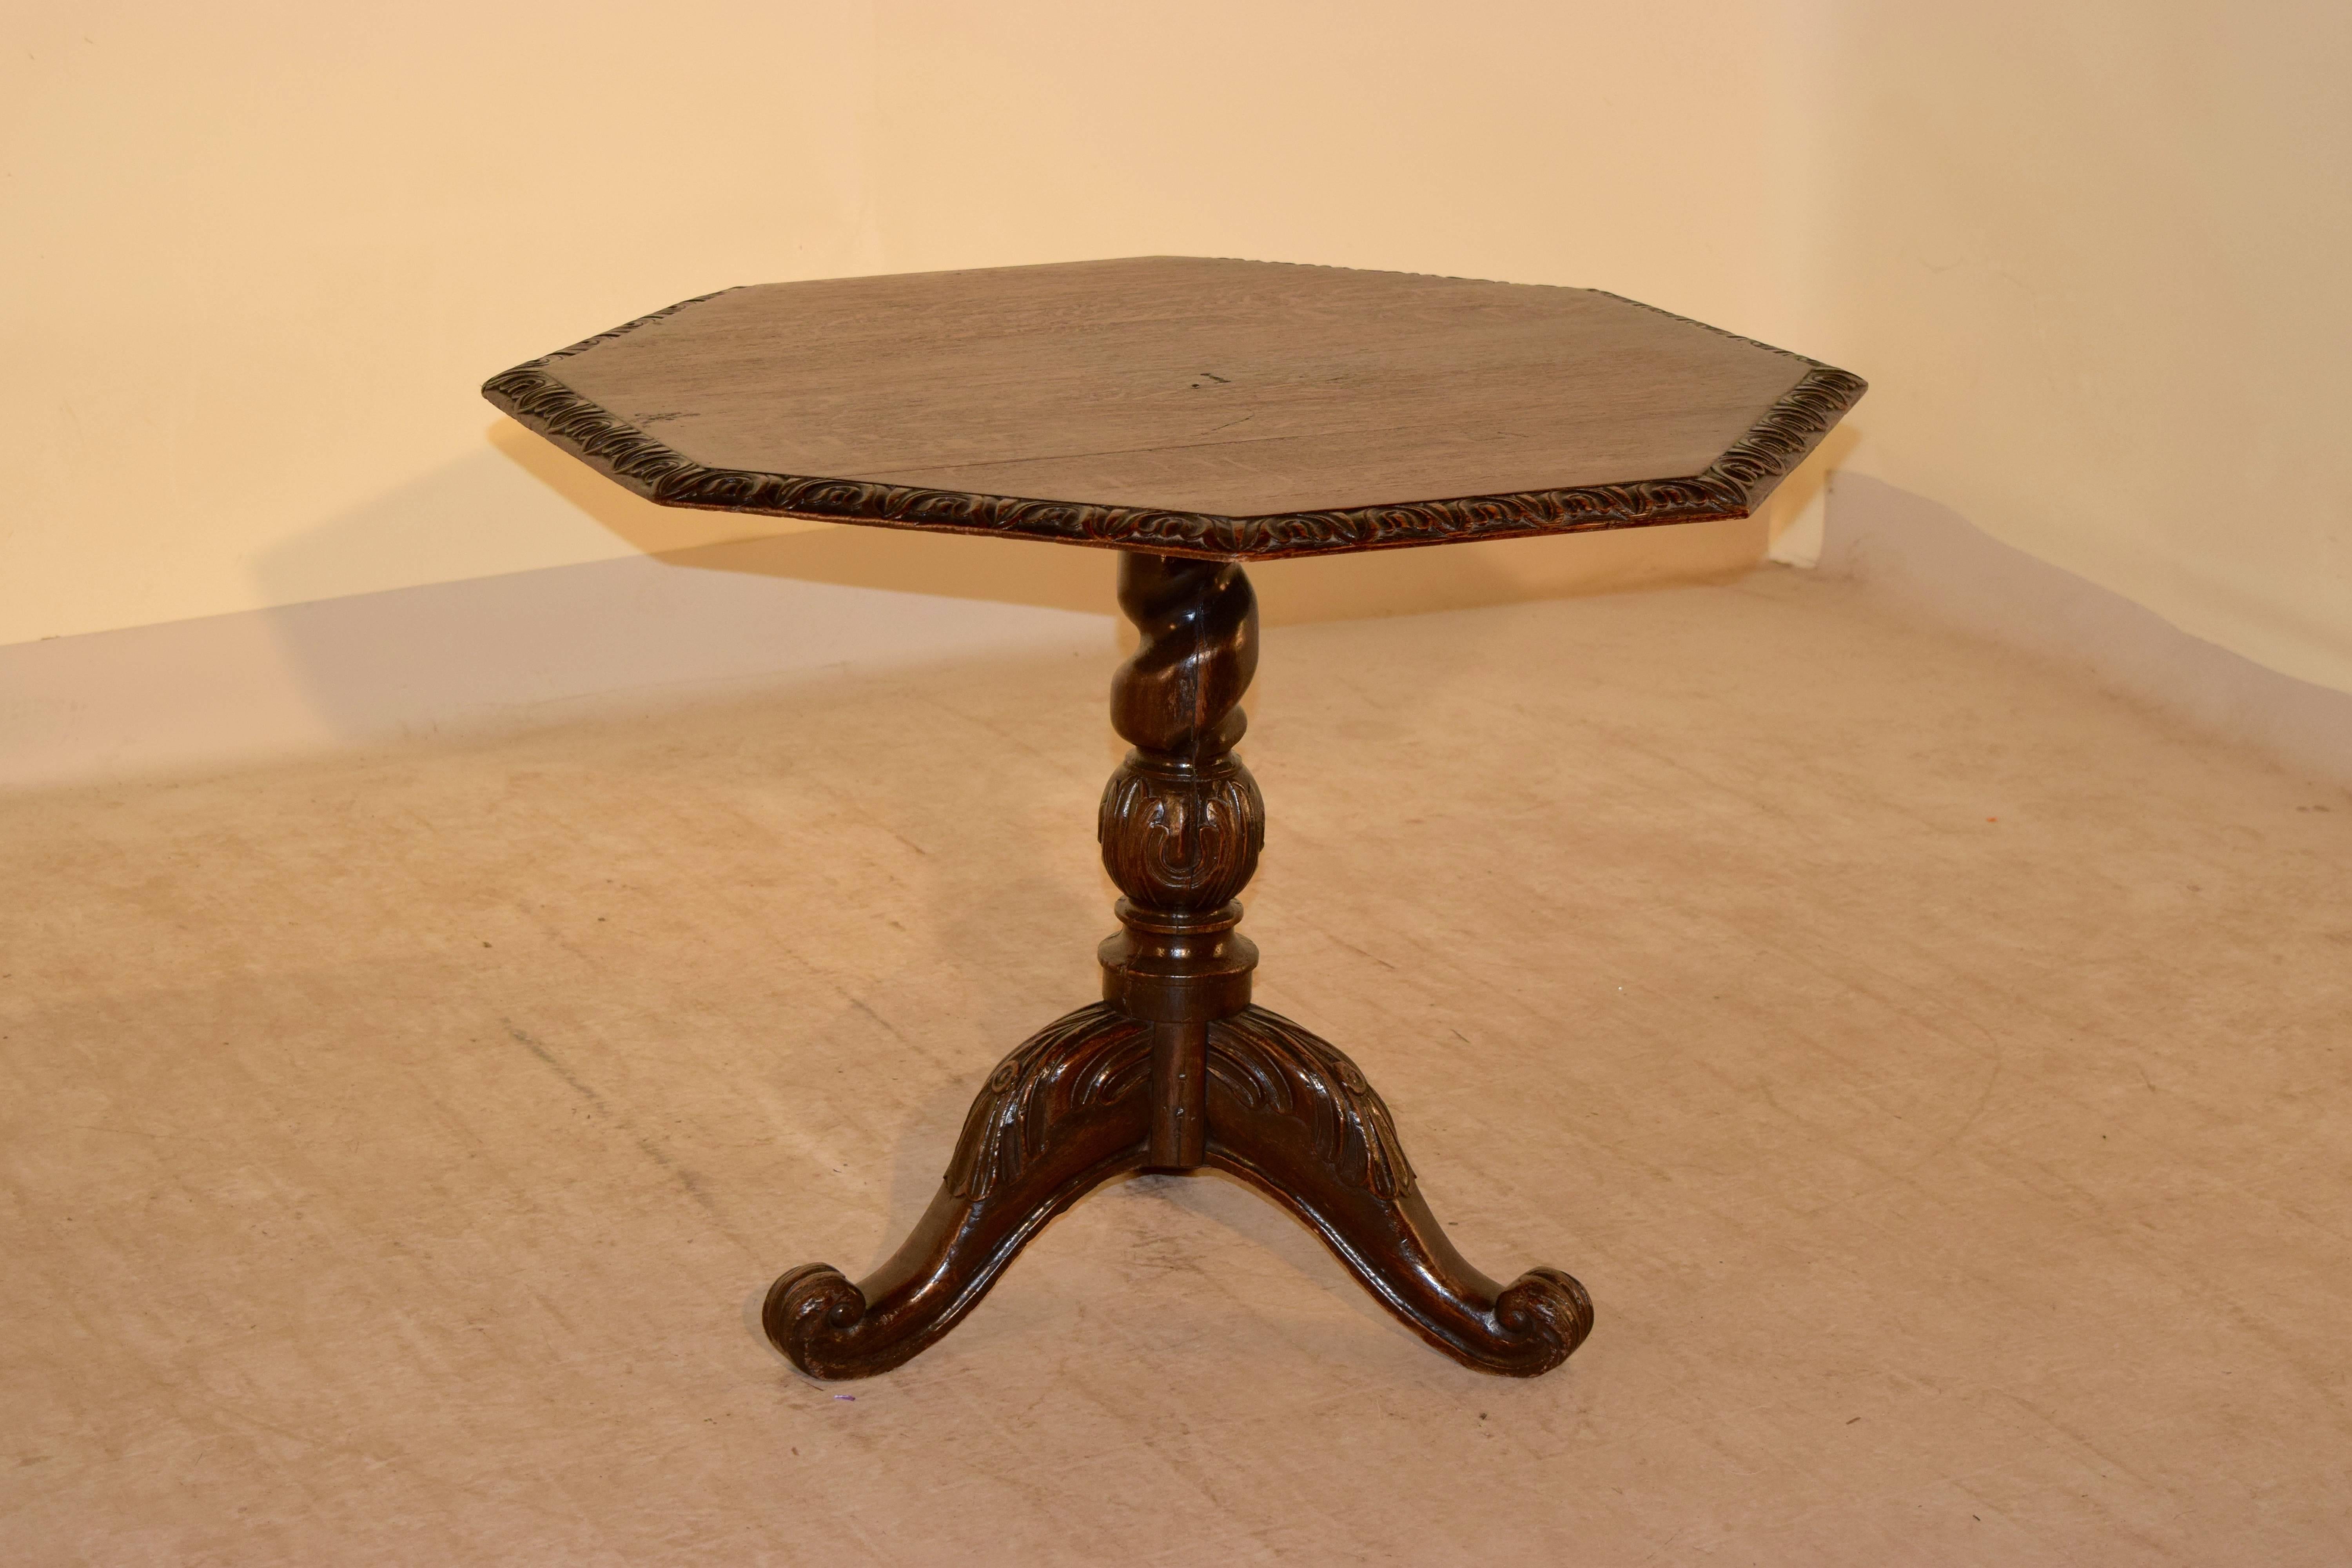 19th century English tilt-top table made from oak. The top has a beveled and wonderfully carved edge following down to a hand-turned barley twist and carved bulbous stem, supported on three hand-carved legs, which have carved decorated knees and end